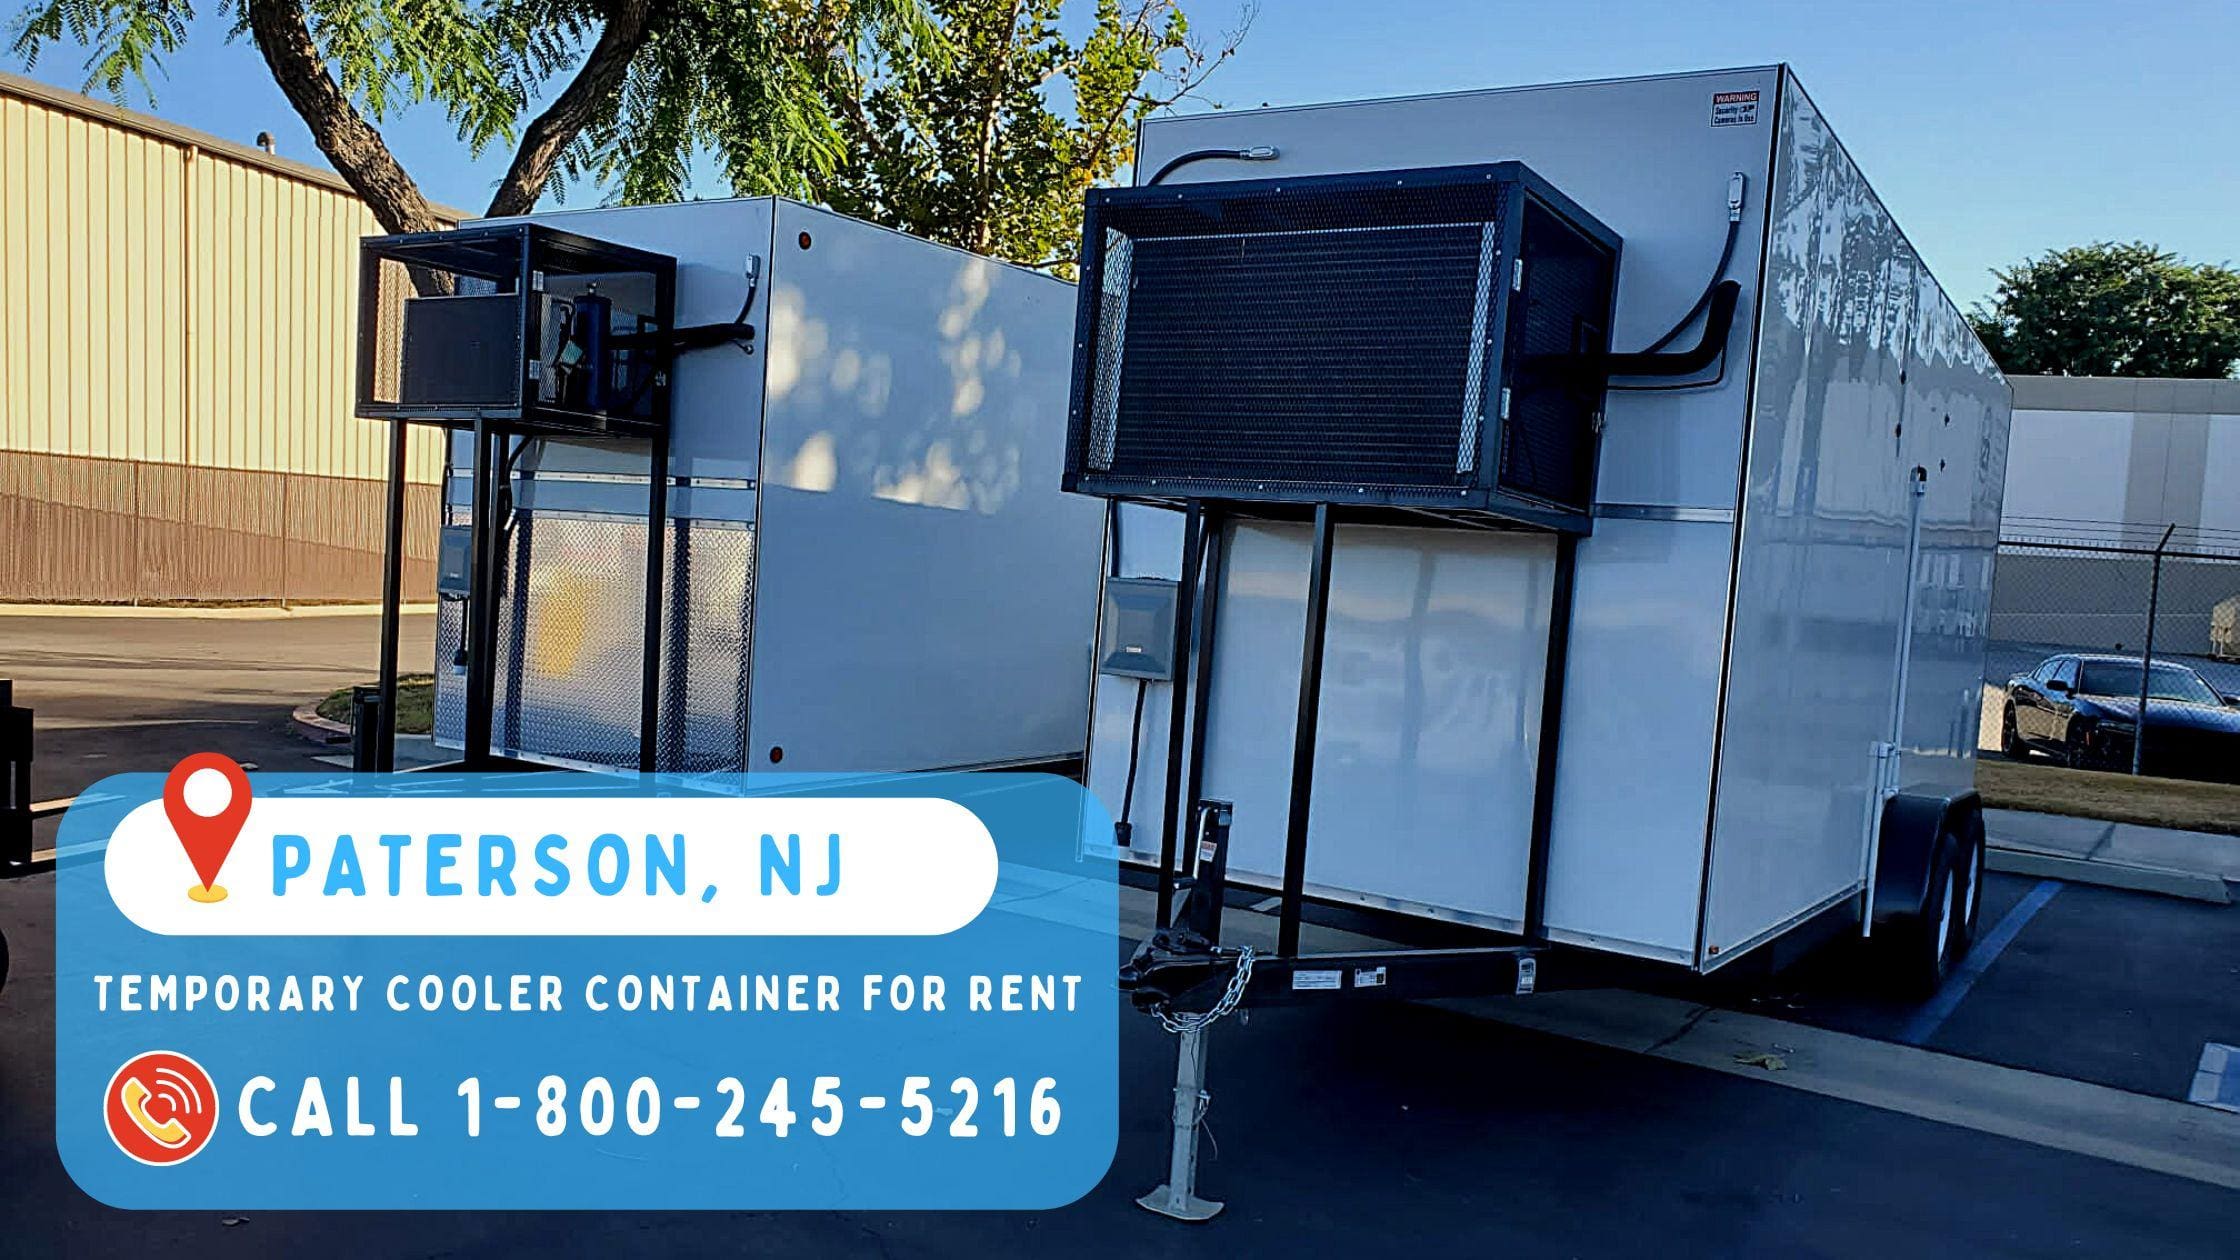 Temporary Cooler Container for Rent in Paterson